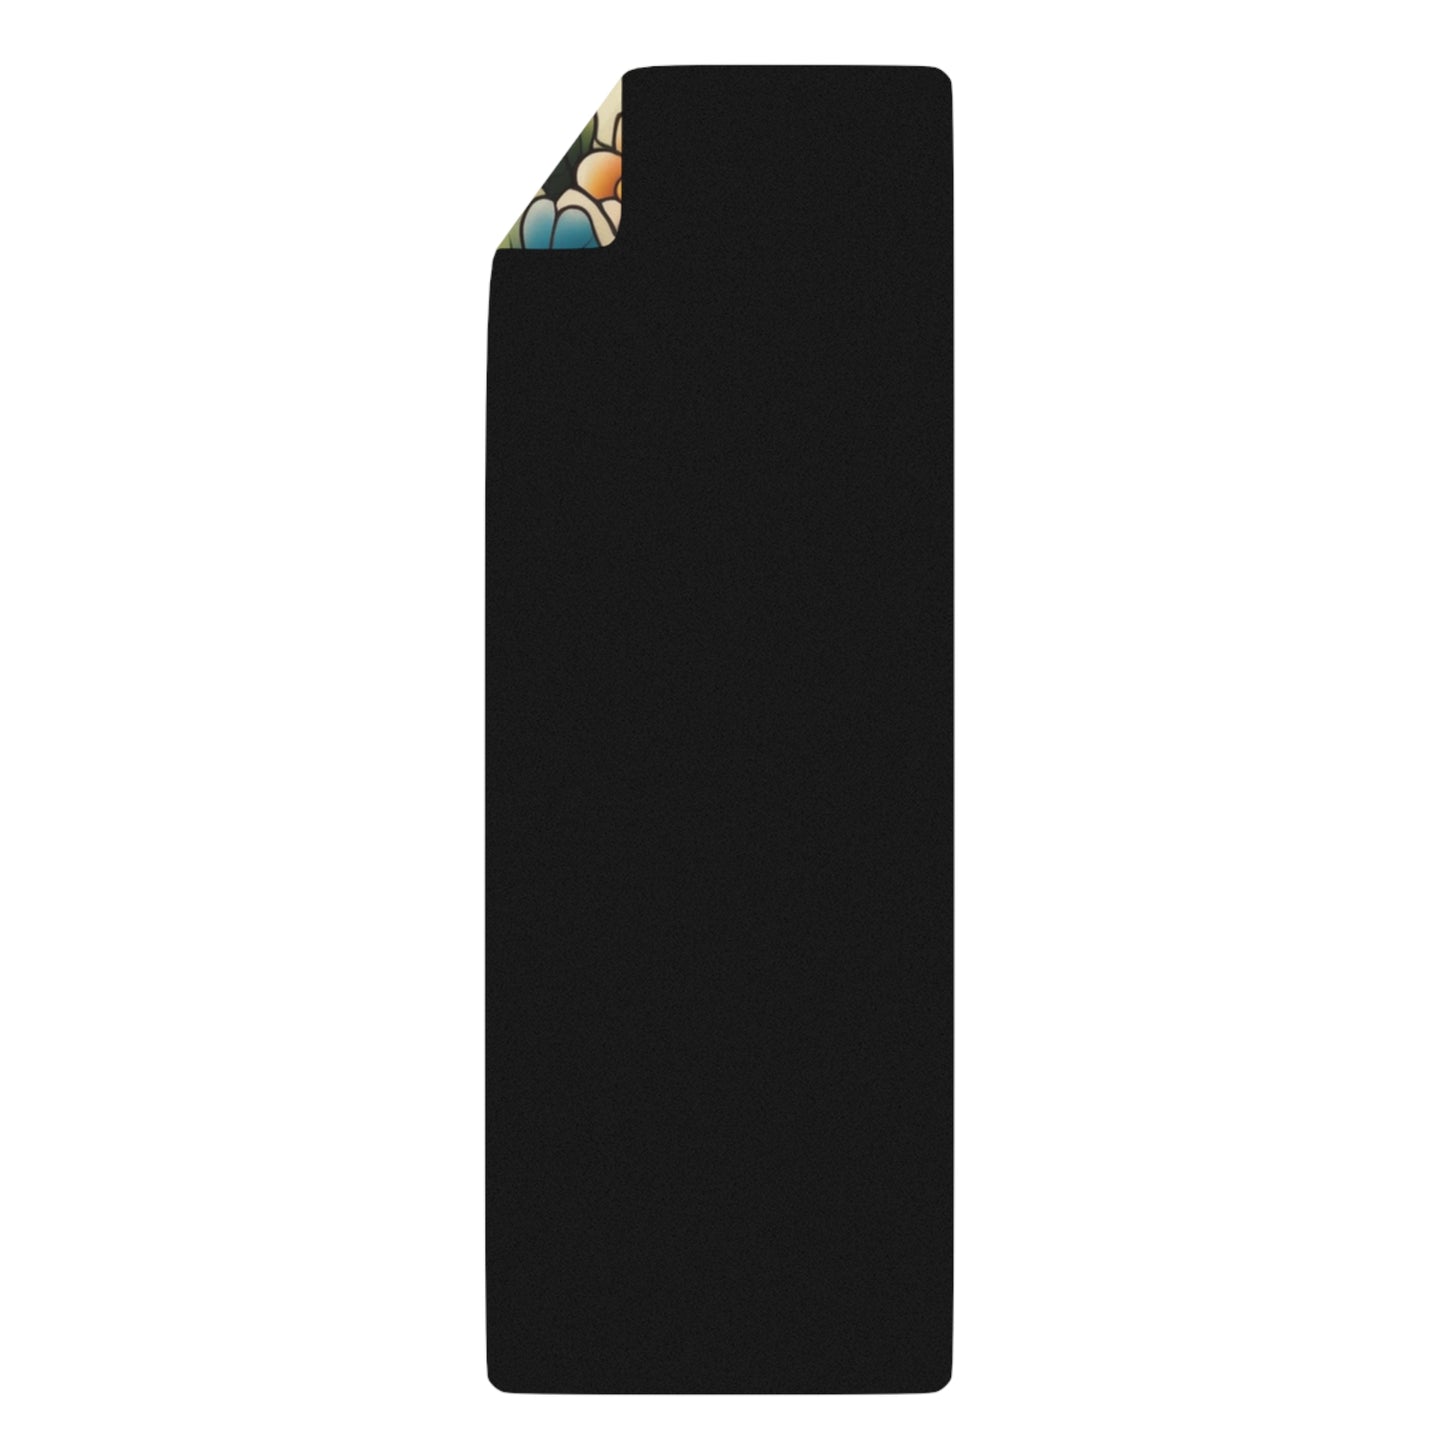 Flowers Melody Rubber Yoga Mat